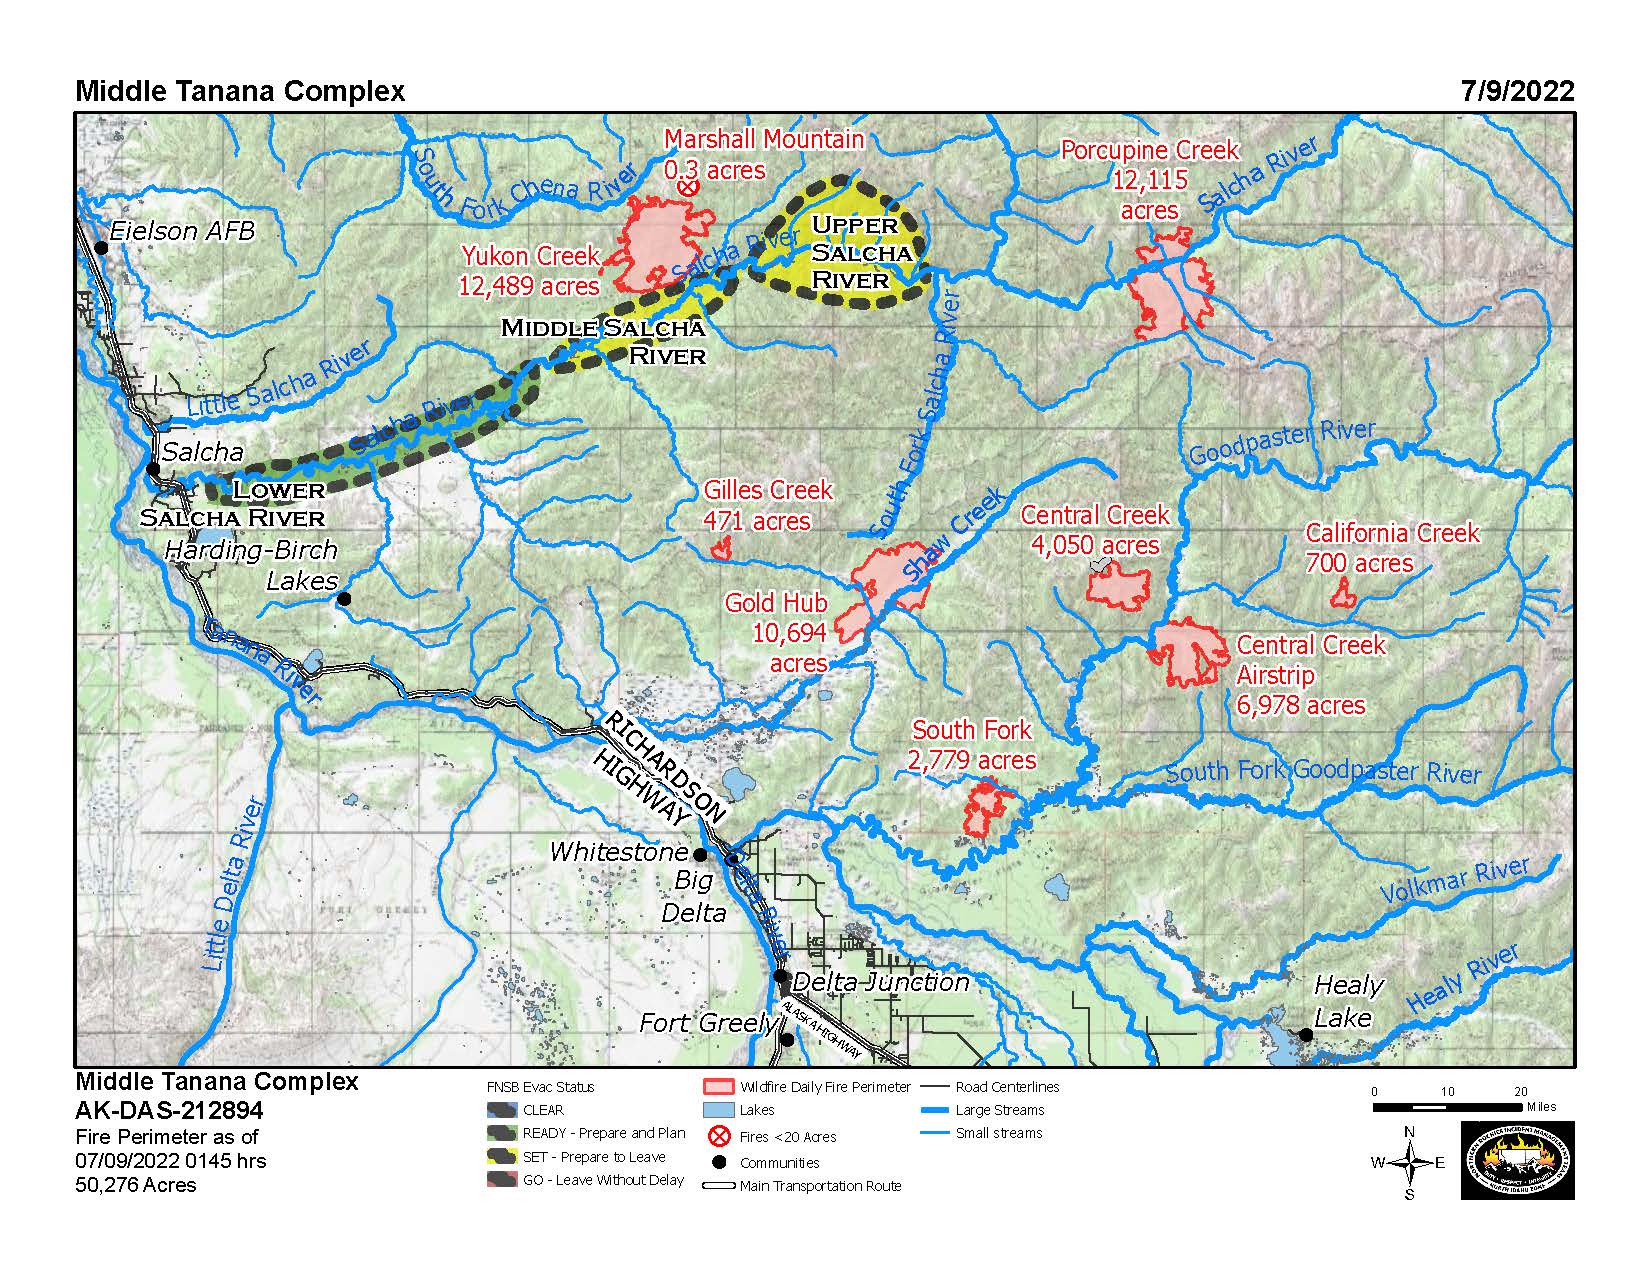 Middle Tanana Complex fire information map showing the nine fires in this complex, including the Yukon Creek, Marshall Mountain, Porcupine Creek, Gilles Creek, Gold Hub, South Fork, Central Creek, Central Creek Airstrip, and California Creek fires.